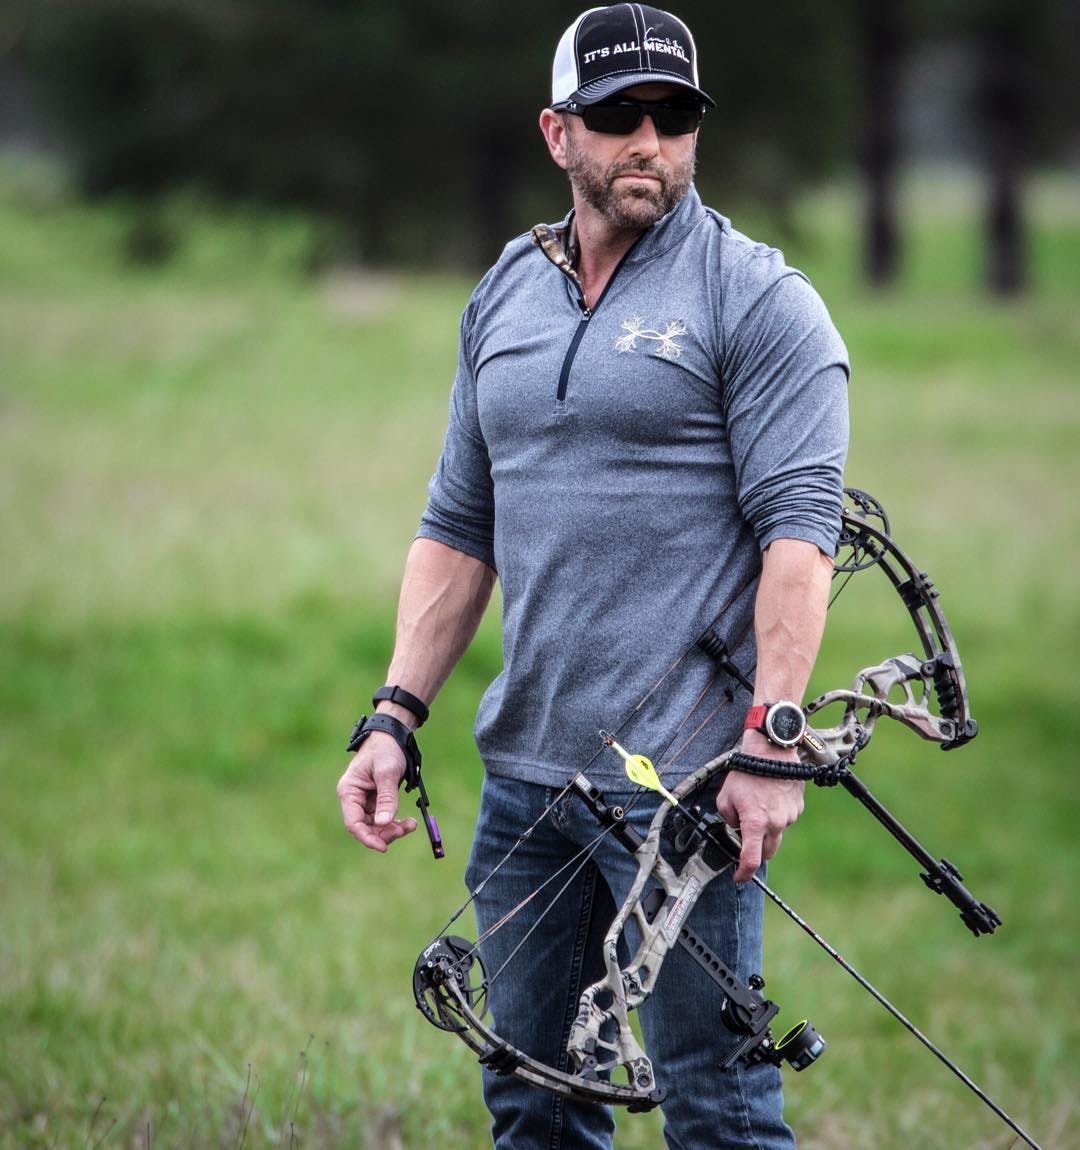 What can we learn from the elite bow hunter about life? | by Damian Mazurek  | Medium